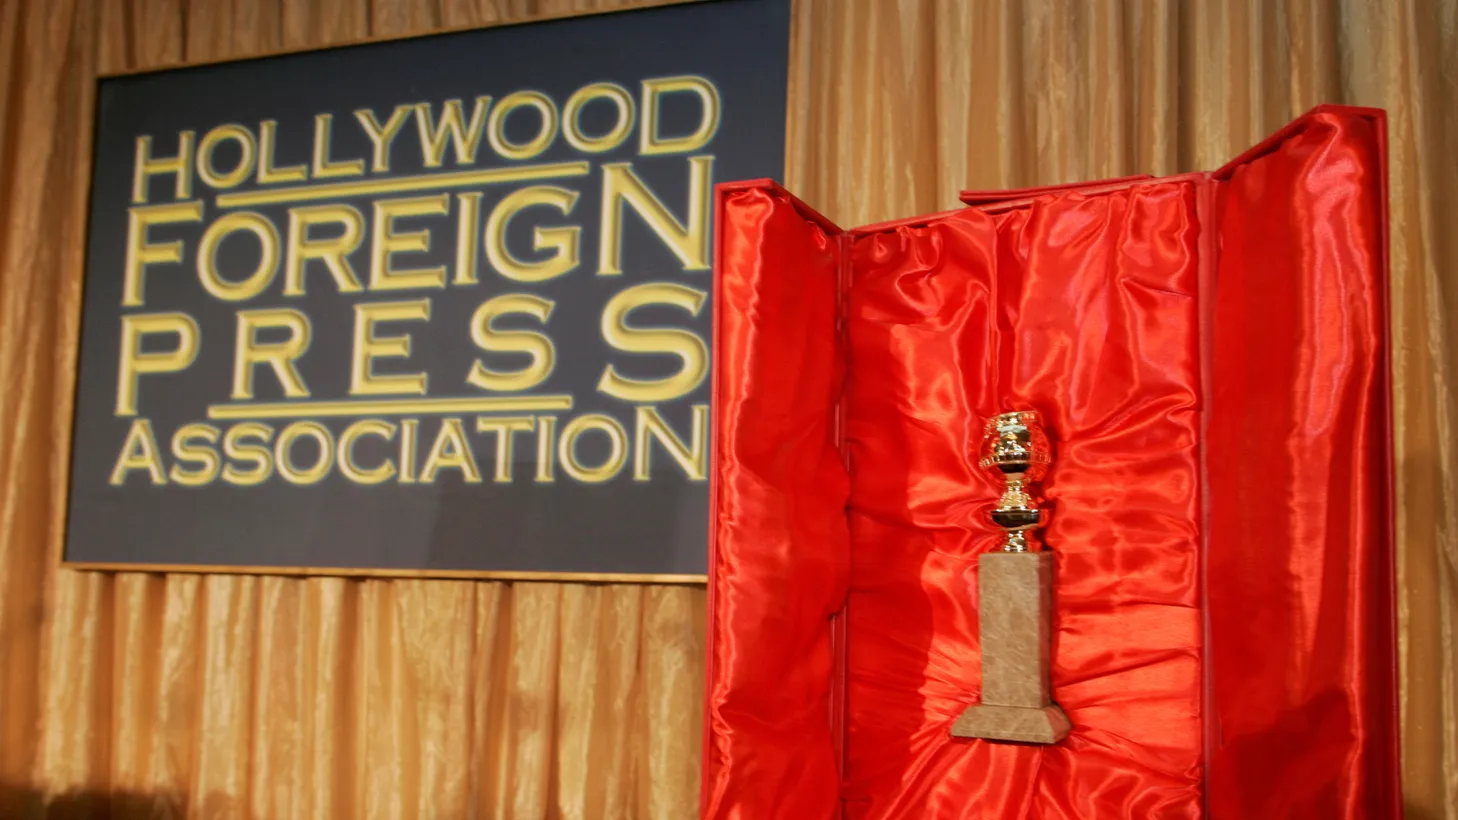 The Hollywood Foreign Press Association's Golden Globe statuette is seen with its red velvet-lined, leather-bound chest during a news conference in Beverly Hills, California, January 6, 2009.